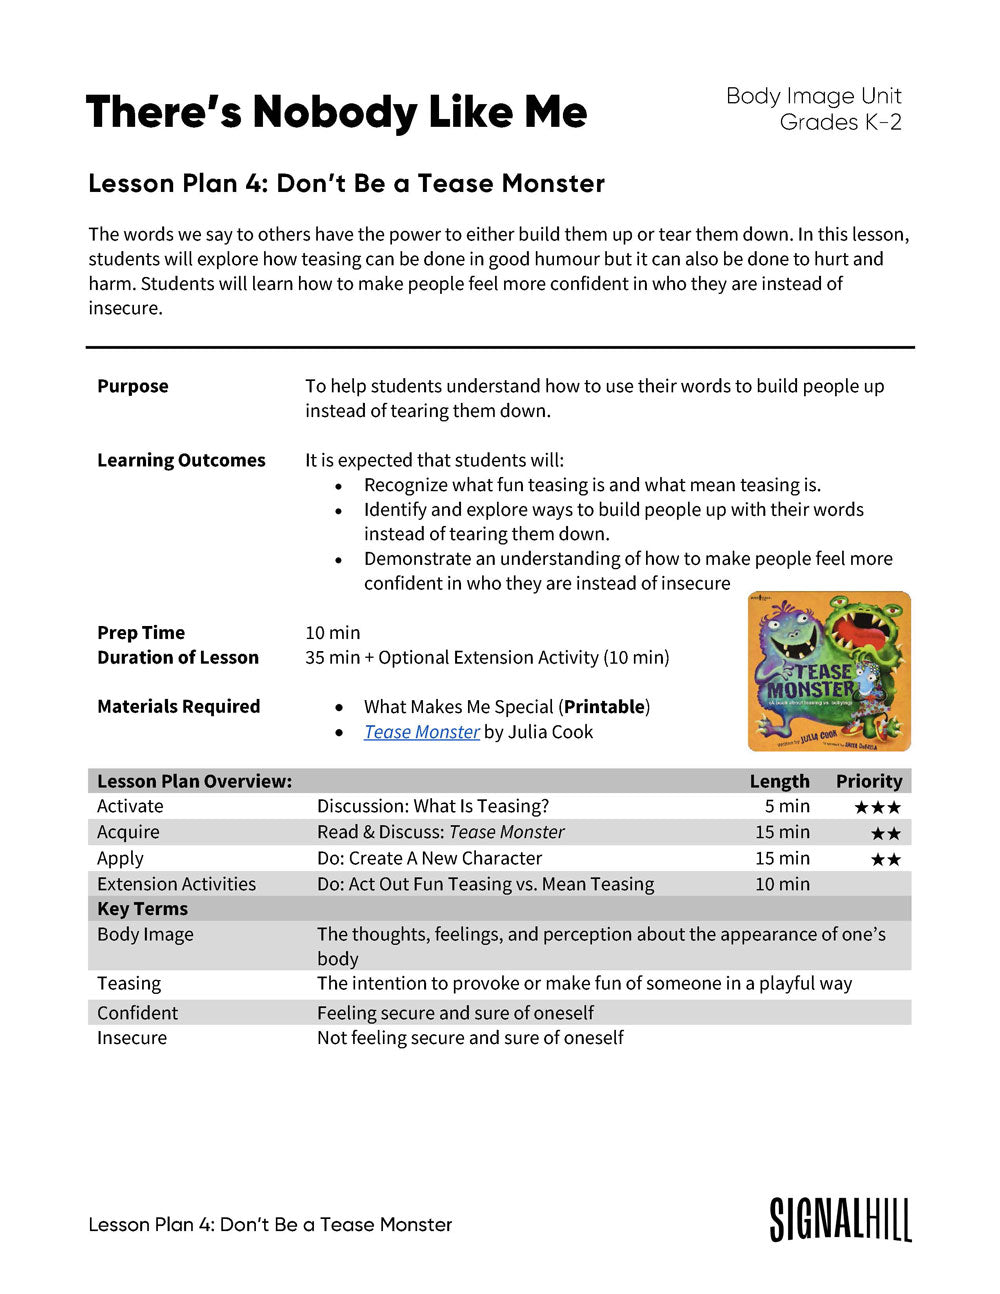 Lesson Plan 4: Don't Be a Tease Monster